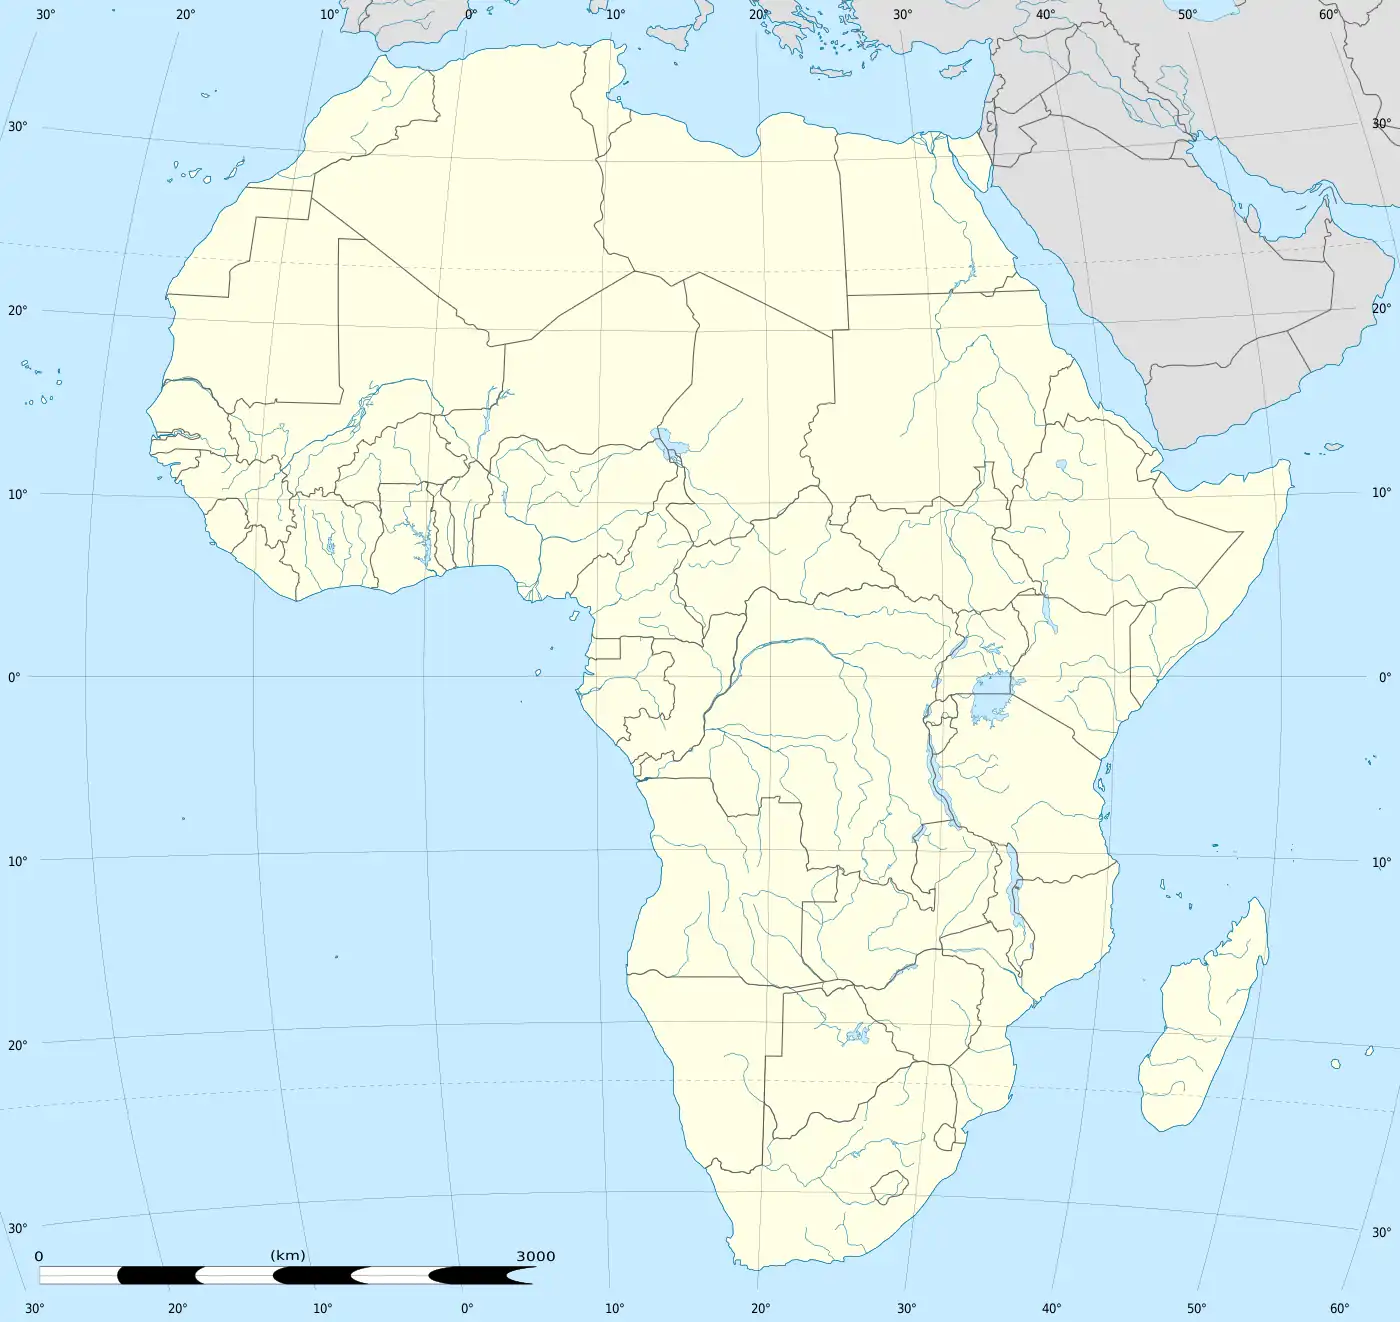 Bethlehem is located in Africa